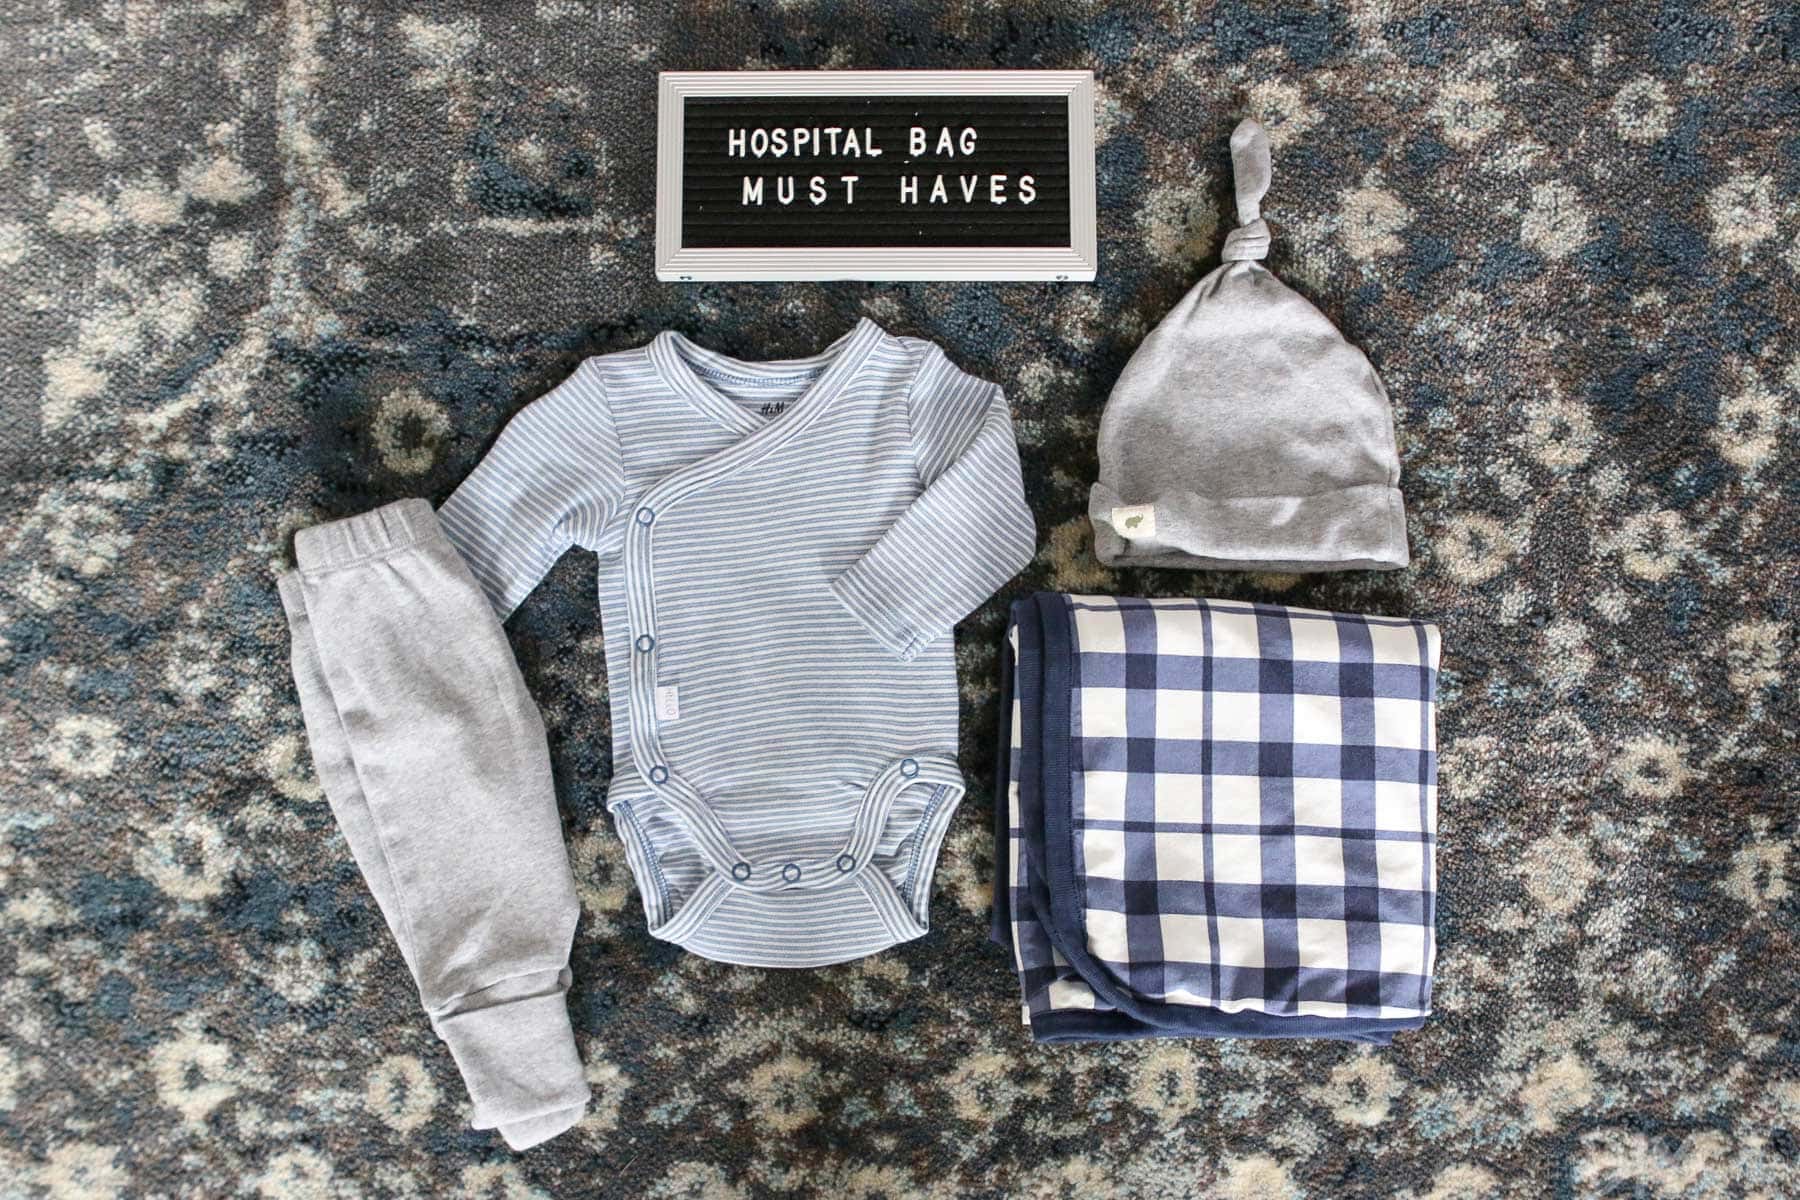 What should I pack for my baby in my hospital bag?